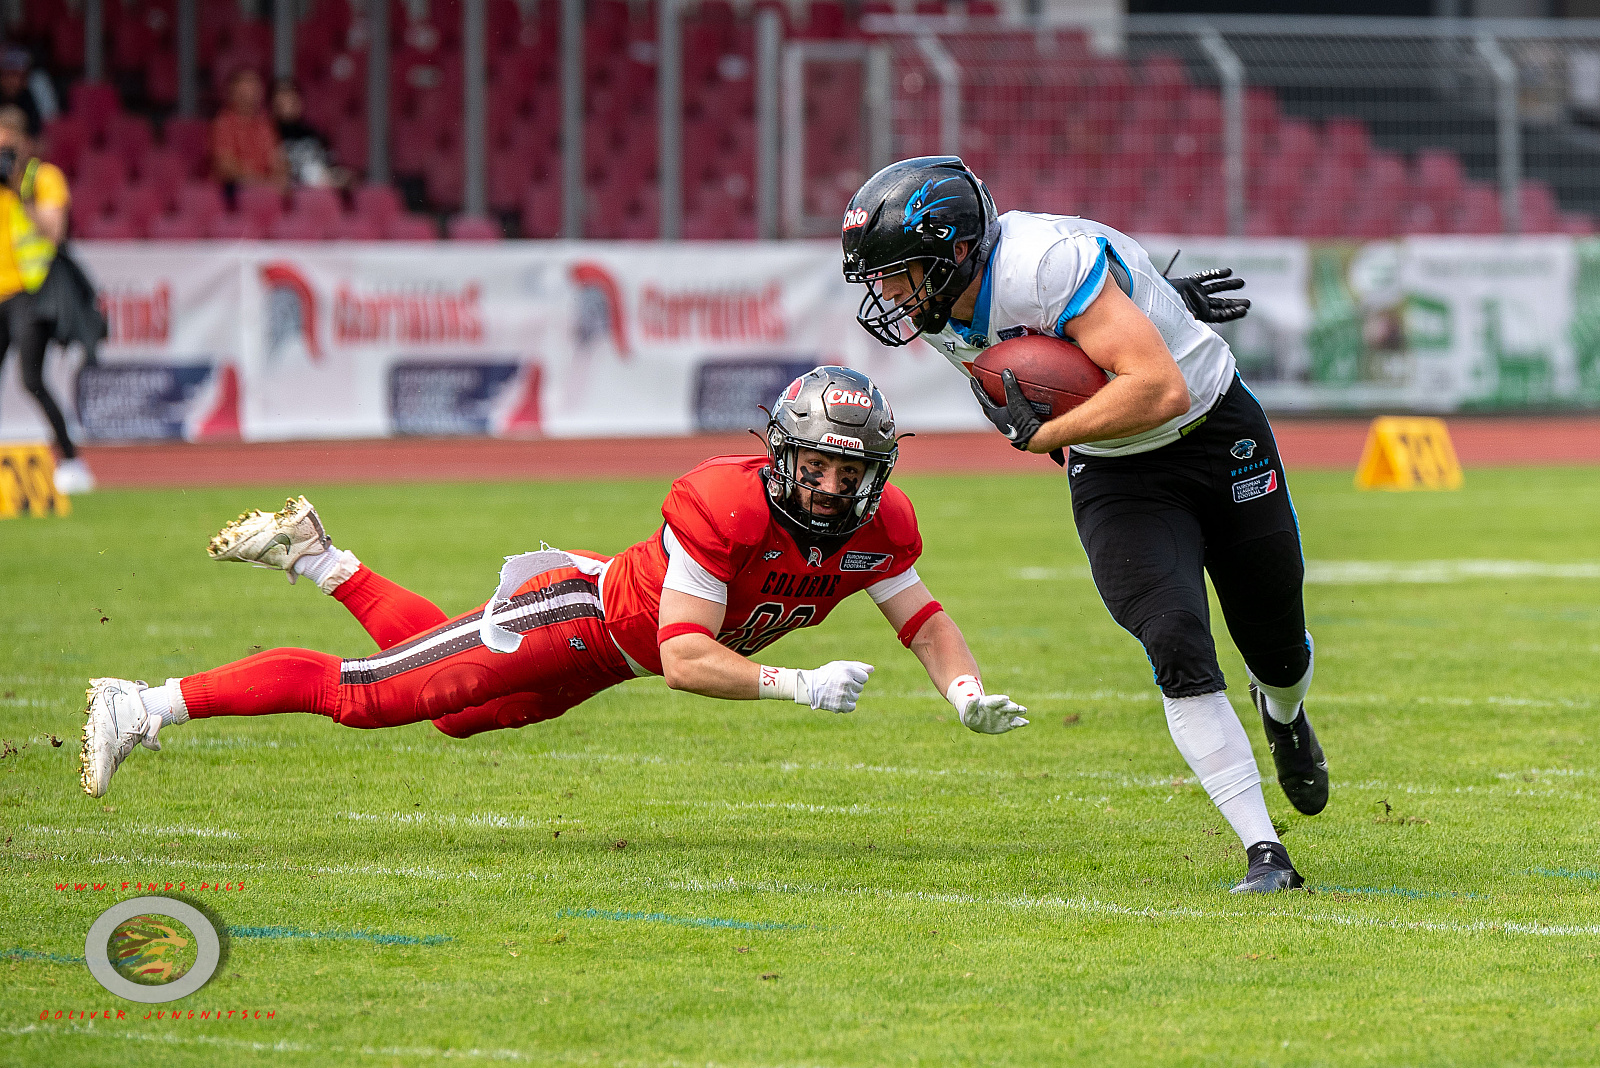 Cologne Centurions vs.  Panthers Wroclaw